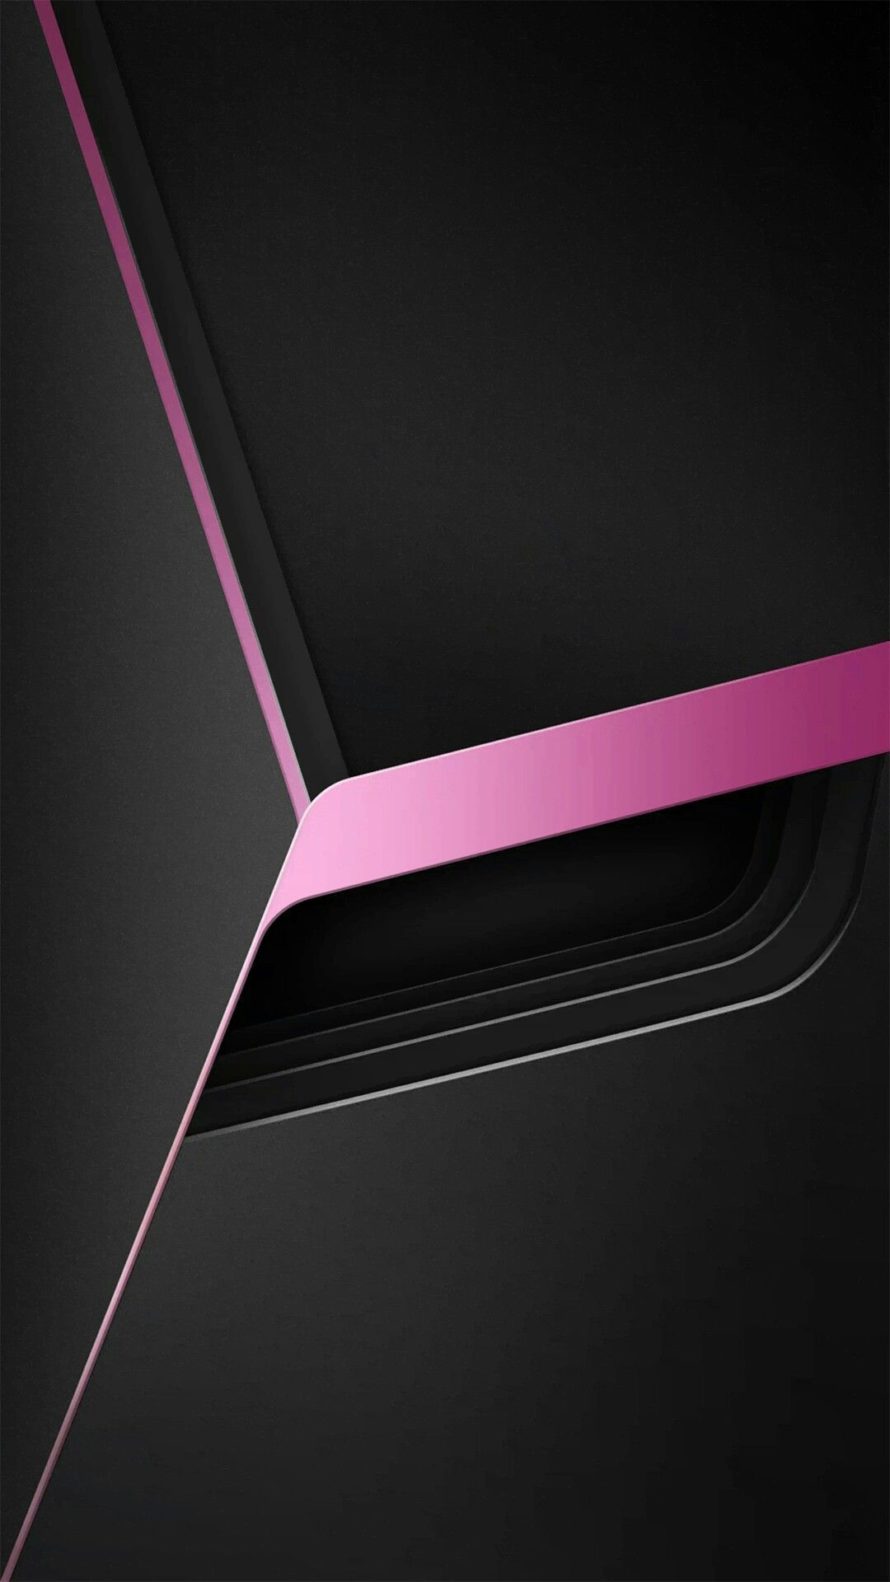 Black And Pink Geometric , HD Wallpaper & Backgrounds